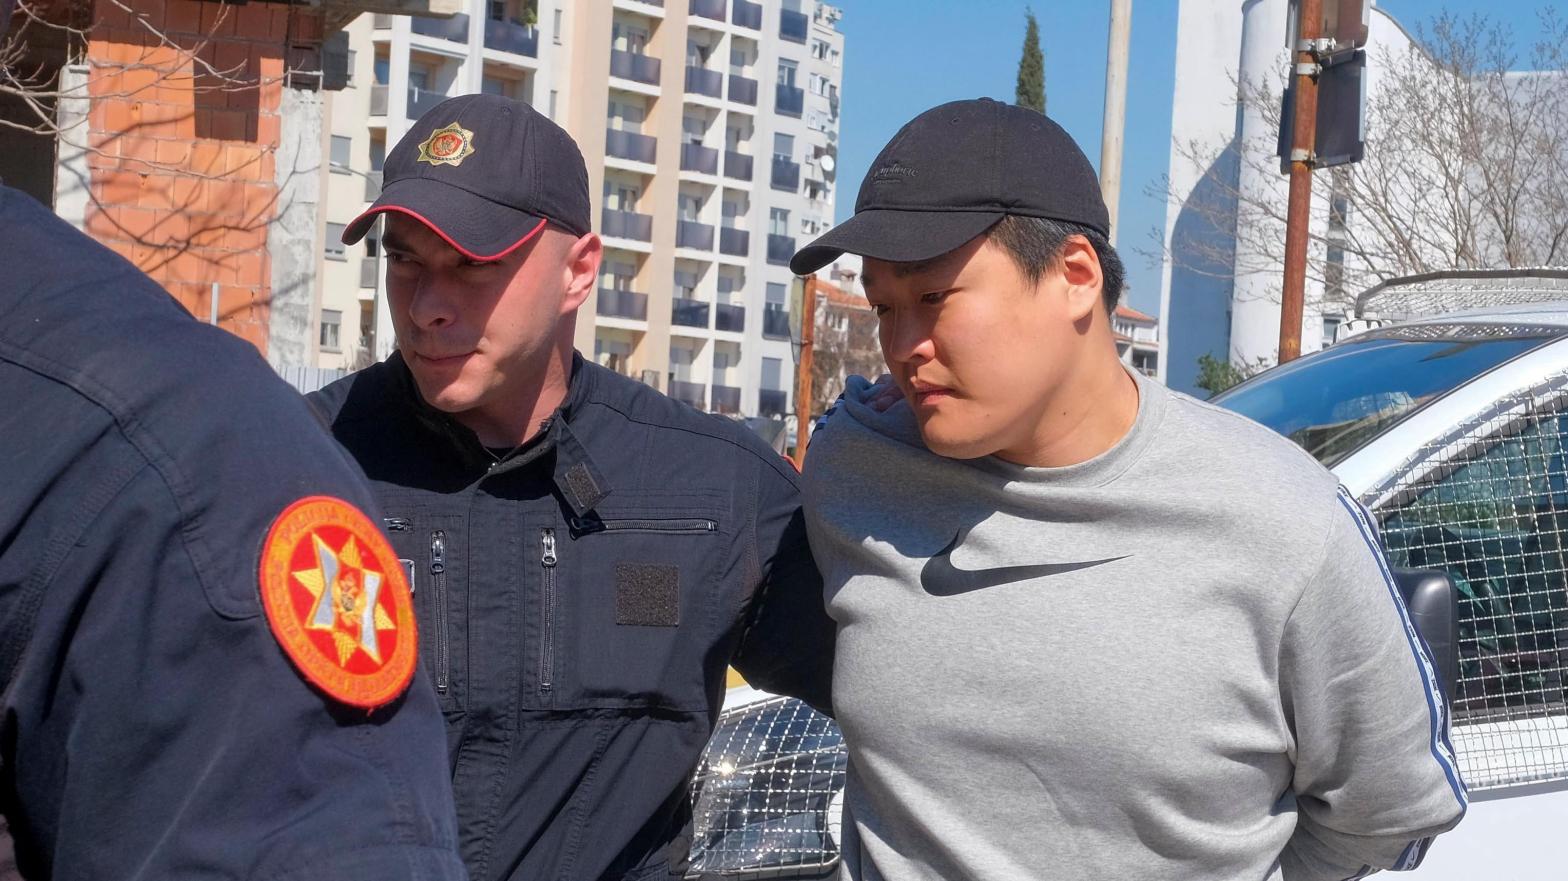 Do Kwon has pleaded not guilty to charges he faked passports and tried to leave Montenegro. He's facing even more serious charges in both the U.S. and South Korea. (Photo: Risto Bozovic, AP)